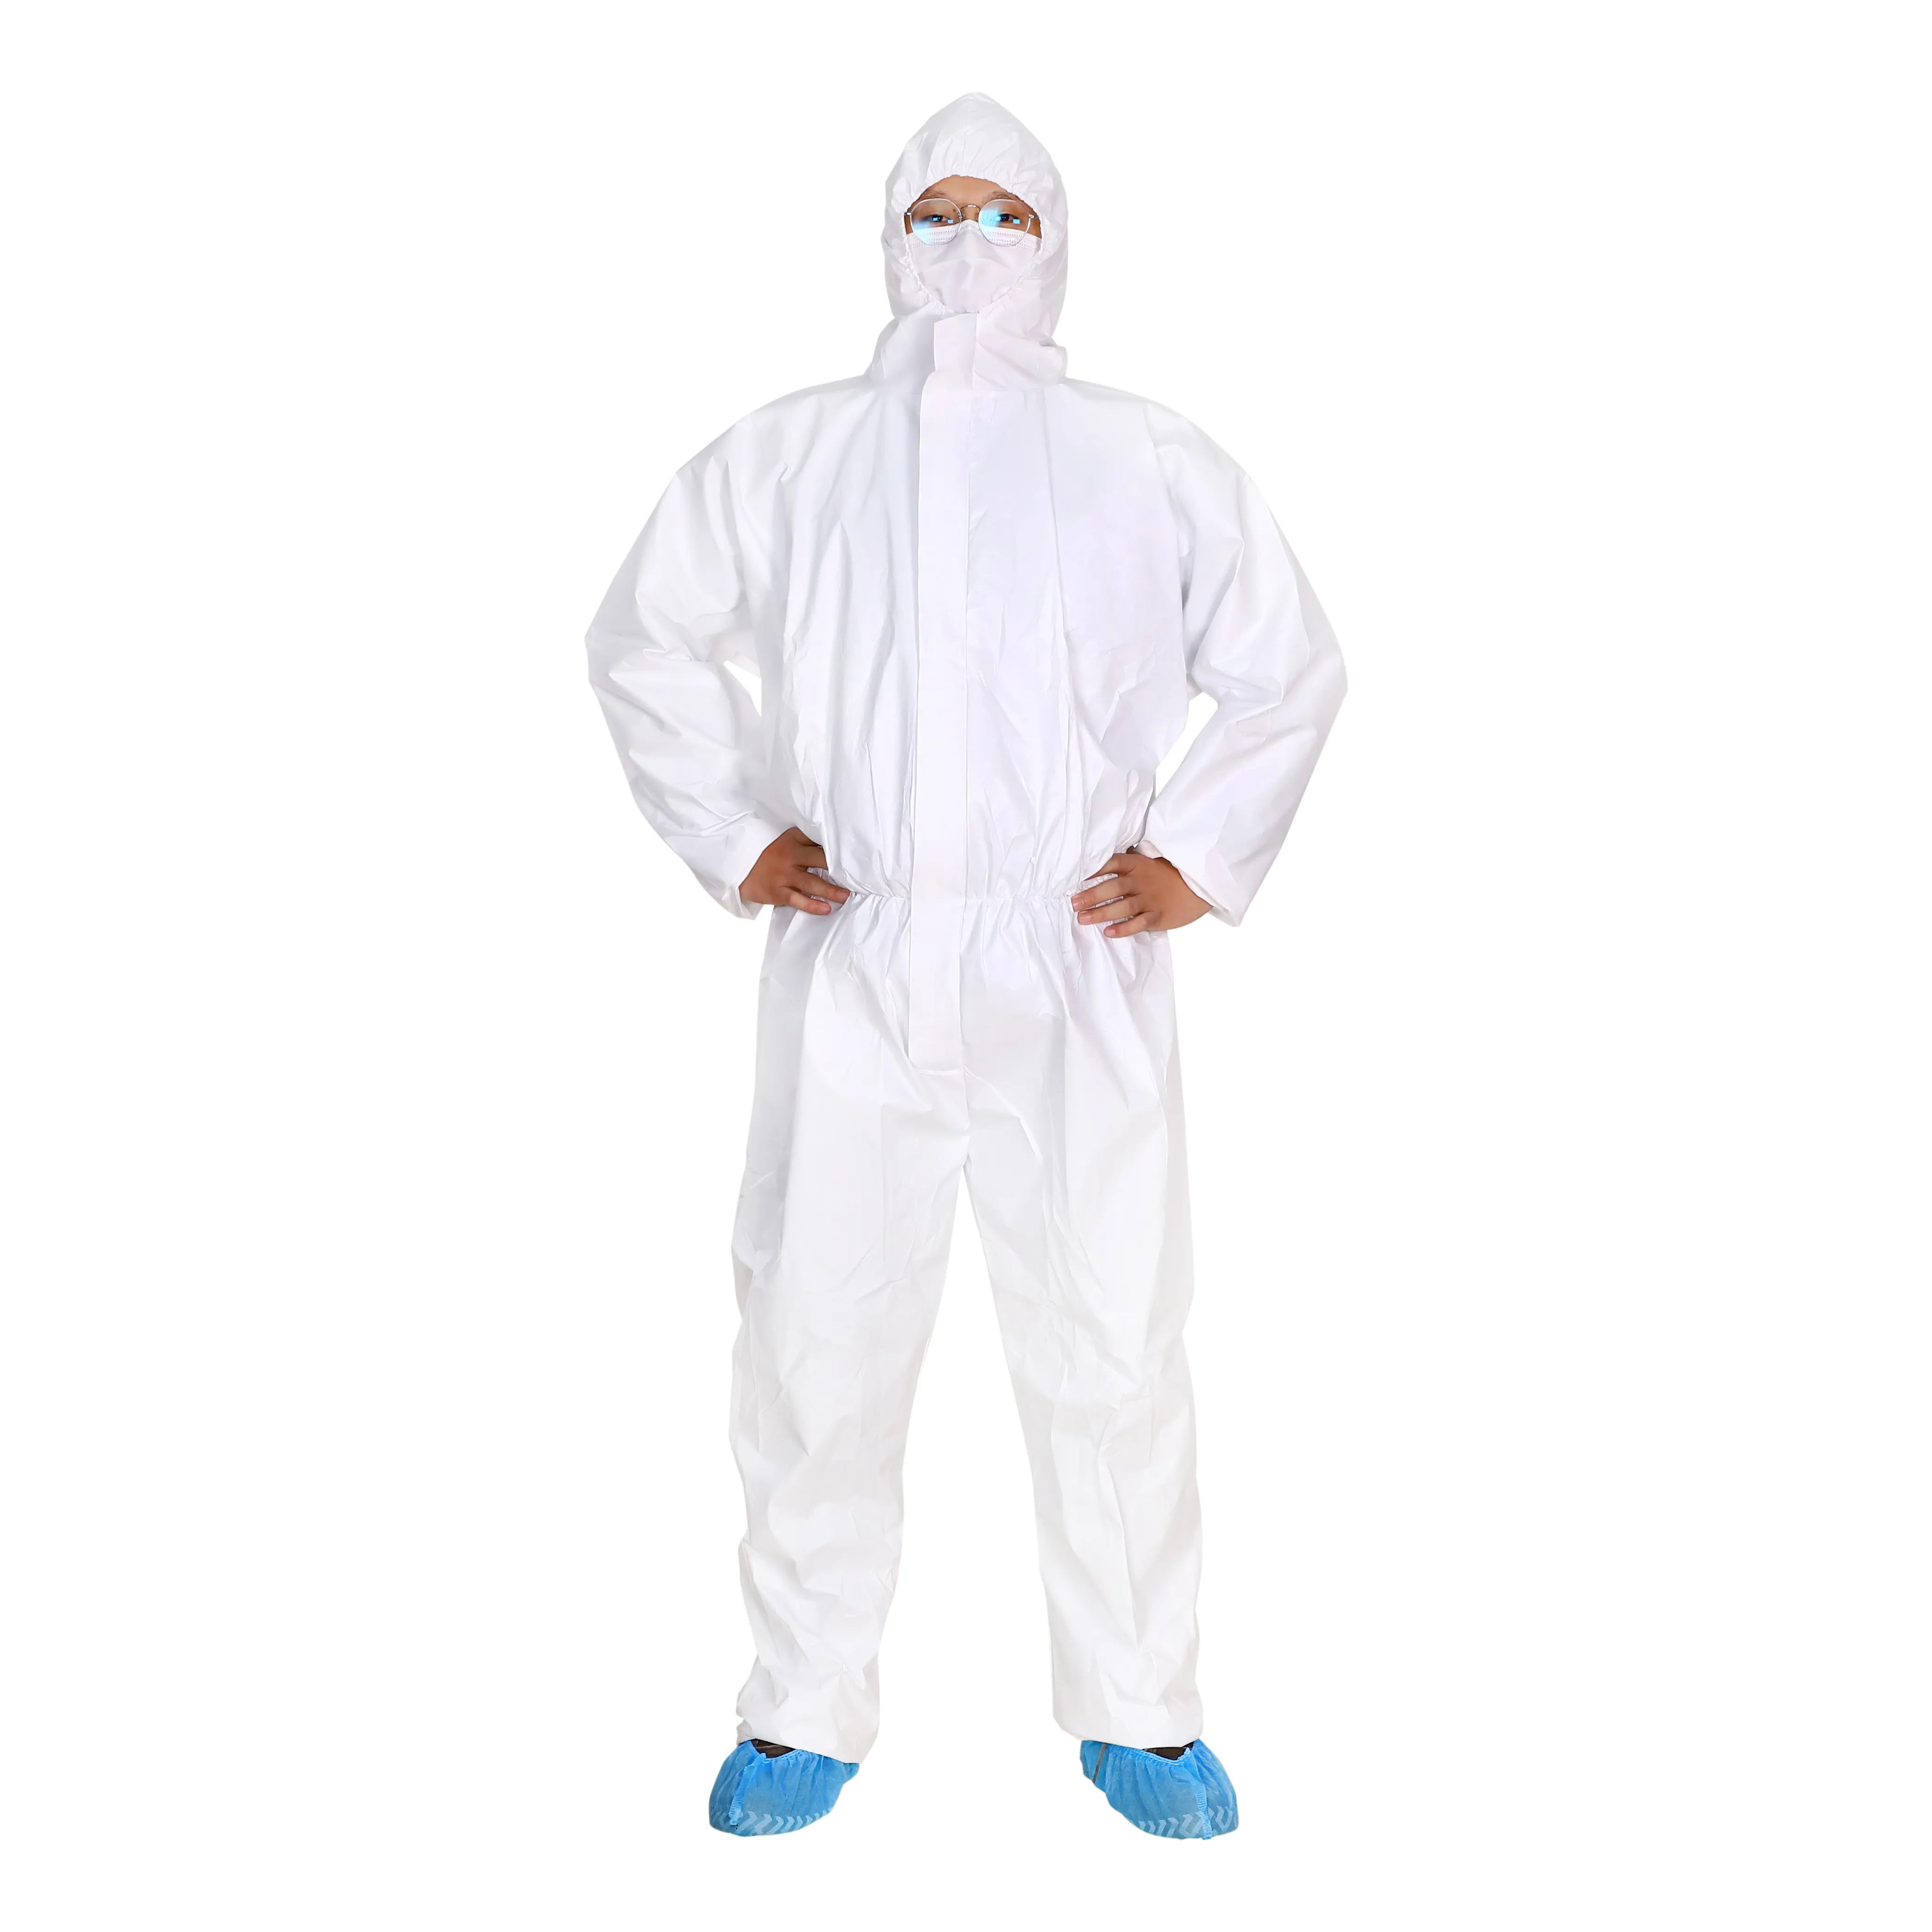 Type 5/6 waterproof microporous white color dust/particulate resistant hazmat/safety protection coverall